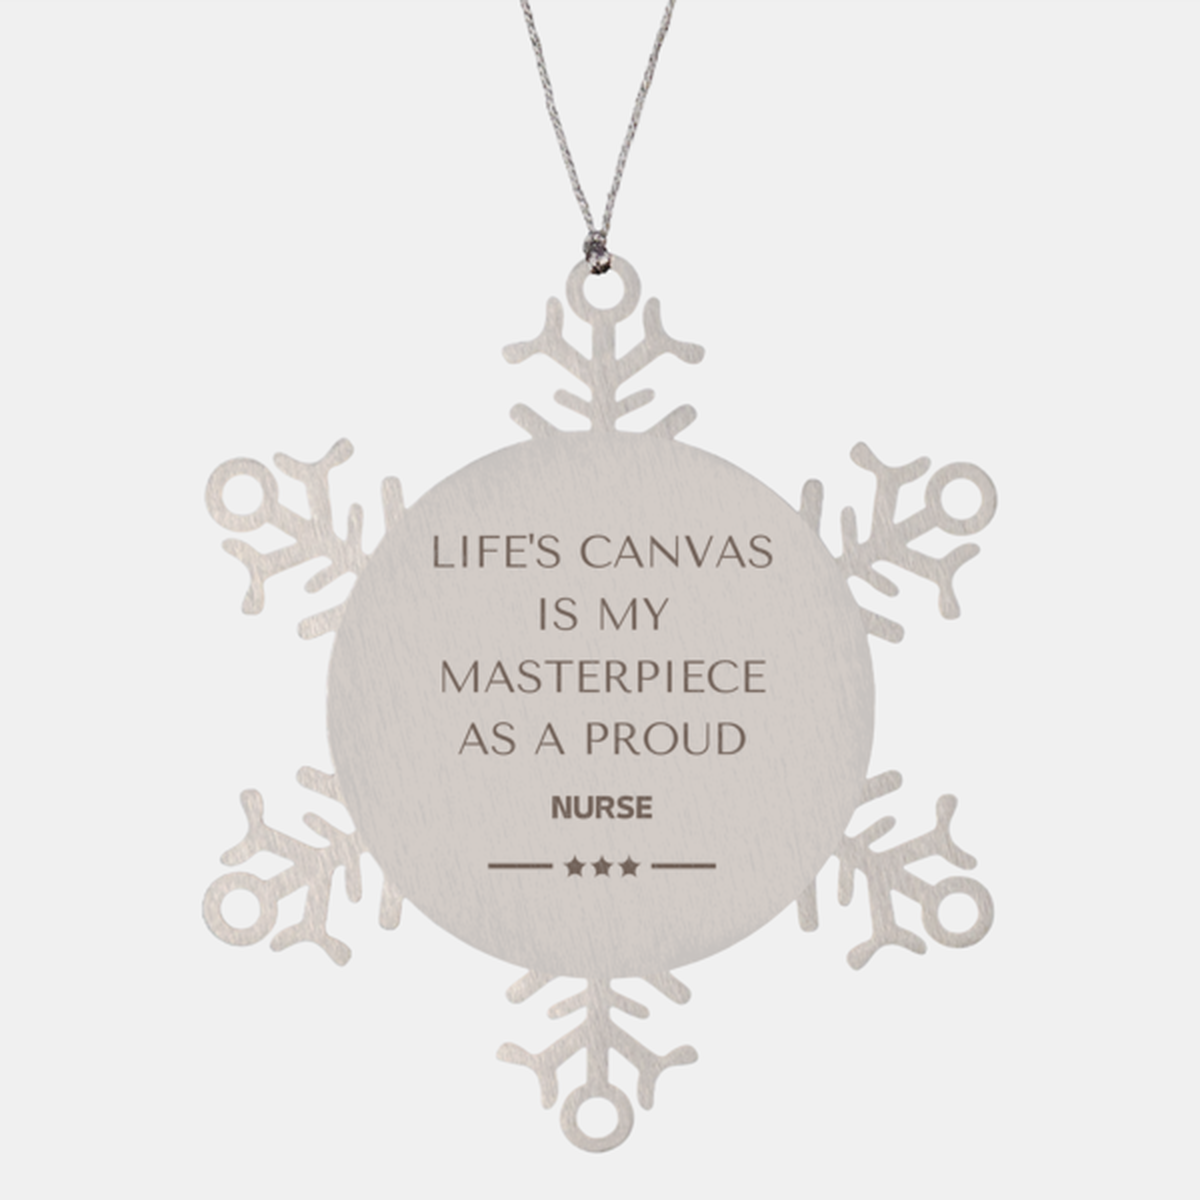 Proud Nurse Gifts, Life's canvas is my masterpiece, Epic Birthday Christmas Unique Snowflake Ornament For Nurse, Coworkers, Men, Women, Friends